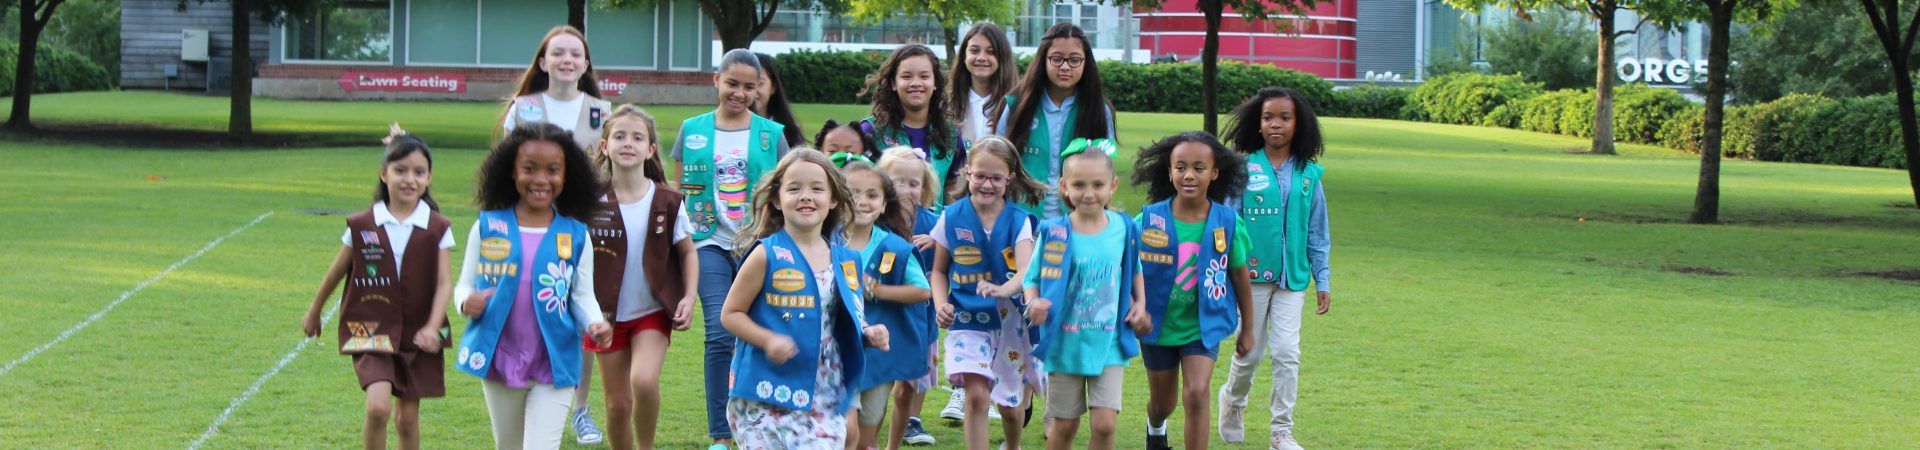  group of girl scouts walking outside smiling at camera 